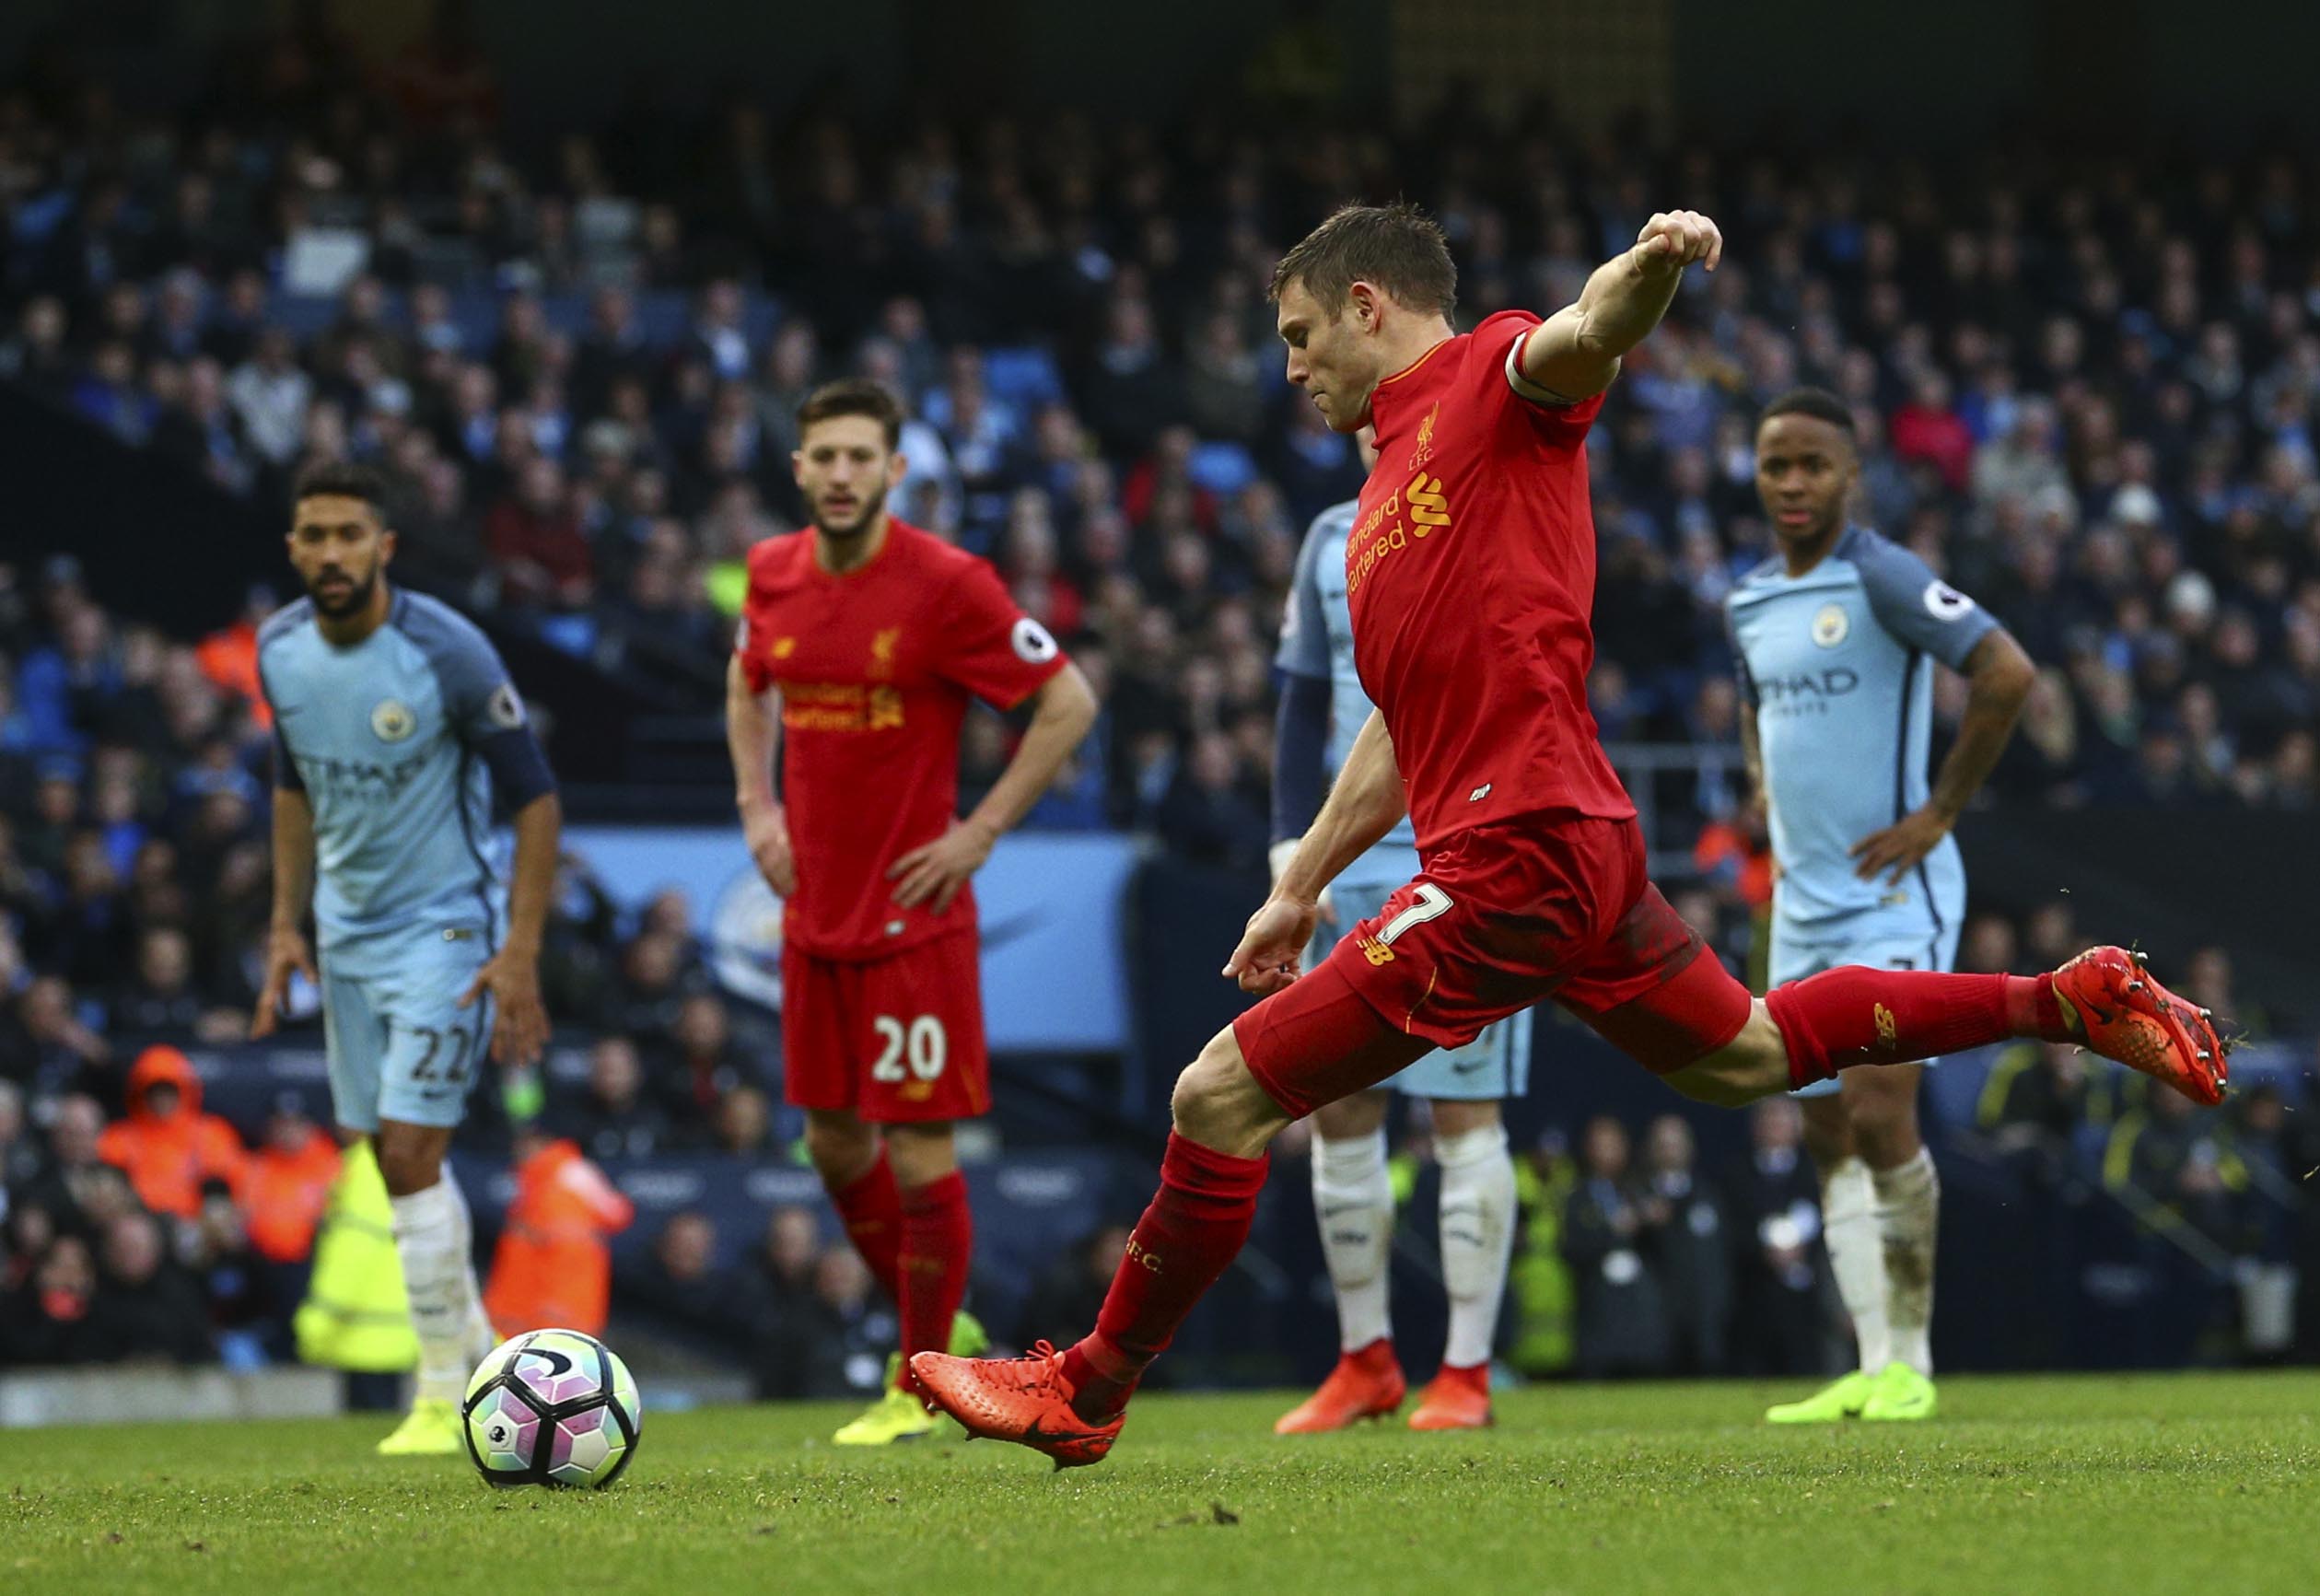 Liverpool's James Milner scores the opening goal from the penalty spot during the English Premier League soccer match between Manchester City and Liverpool at the Etihad Stadium in Manchester, England, on Sunday March 19, 2017. Photo: AP